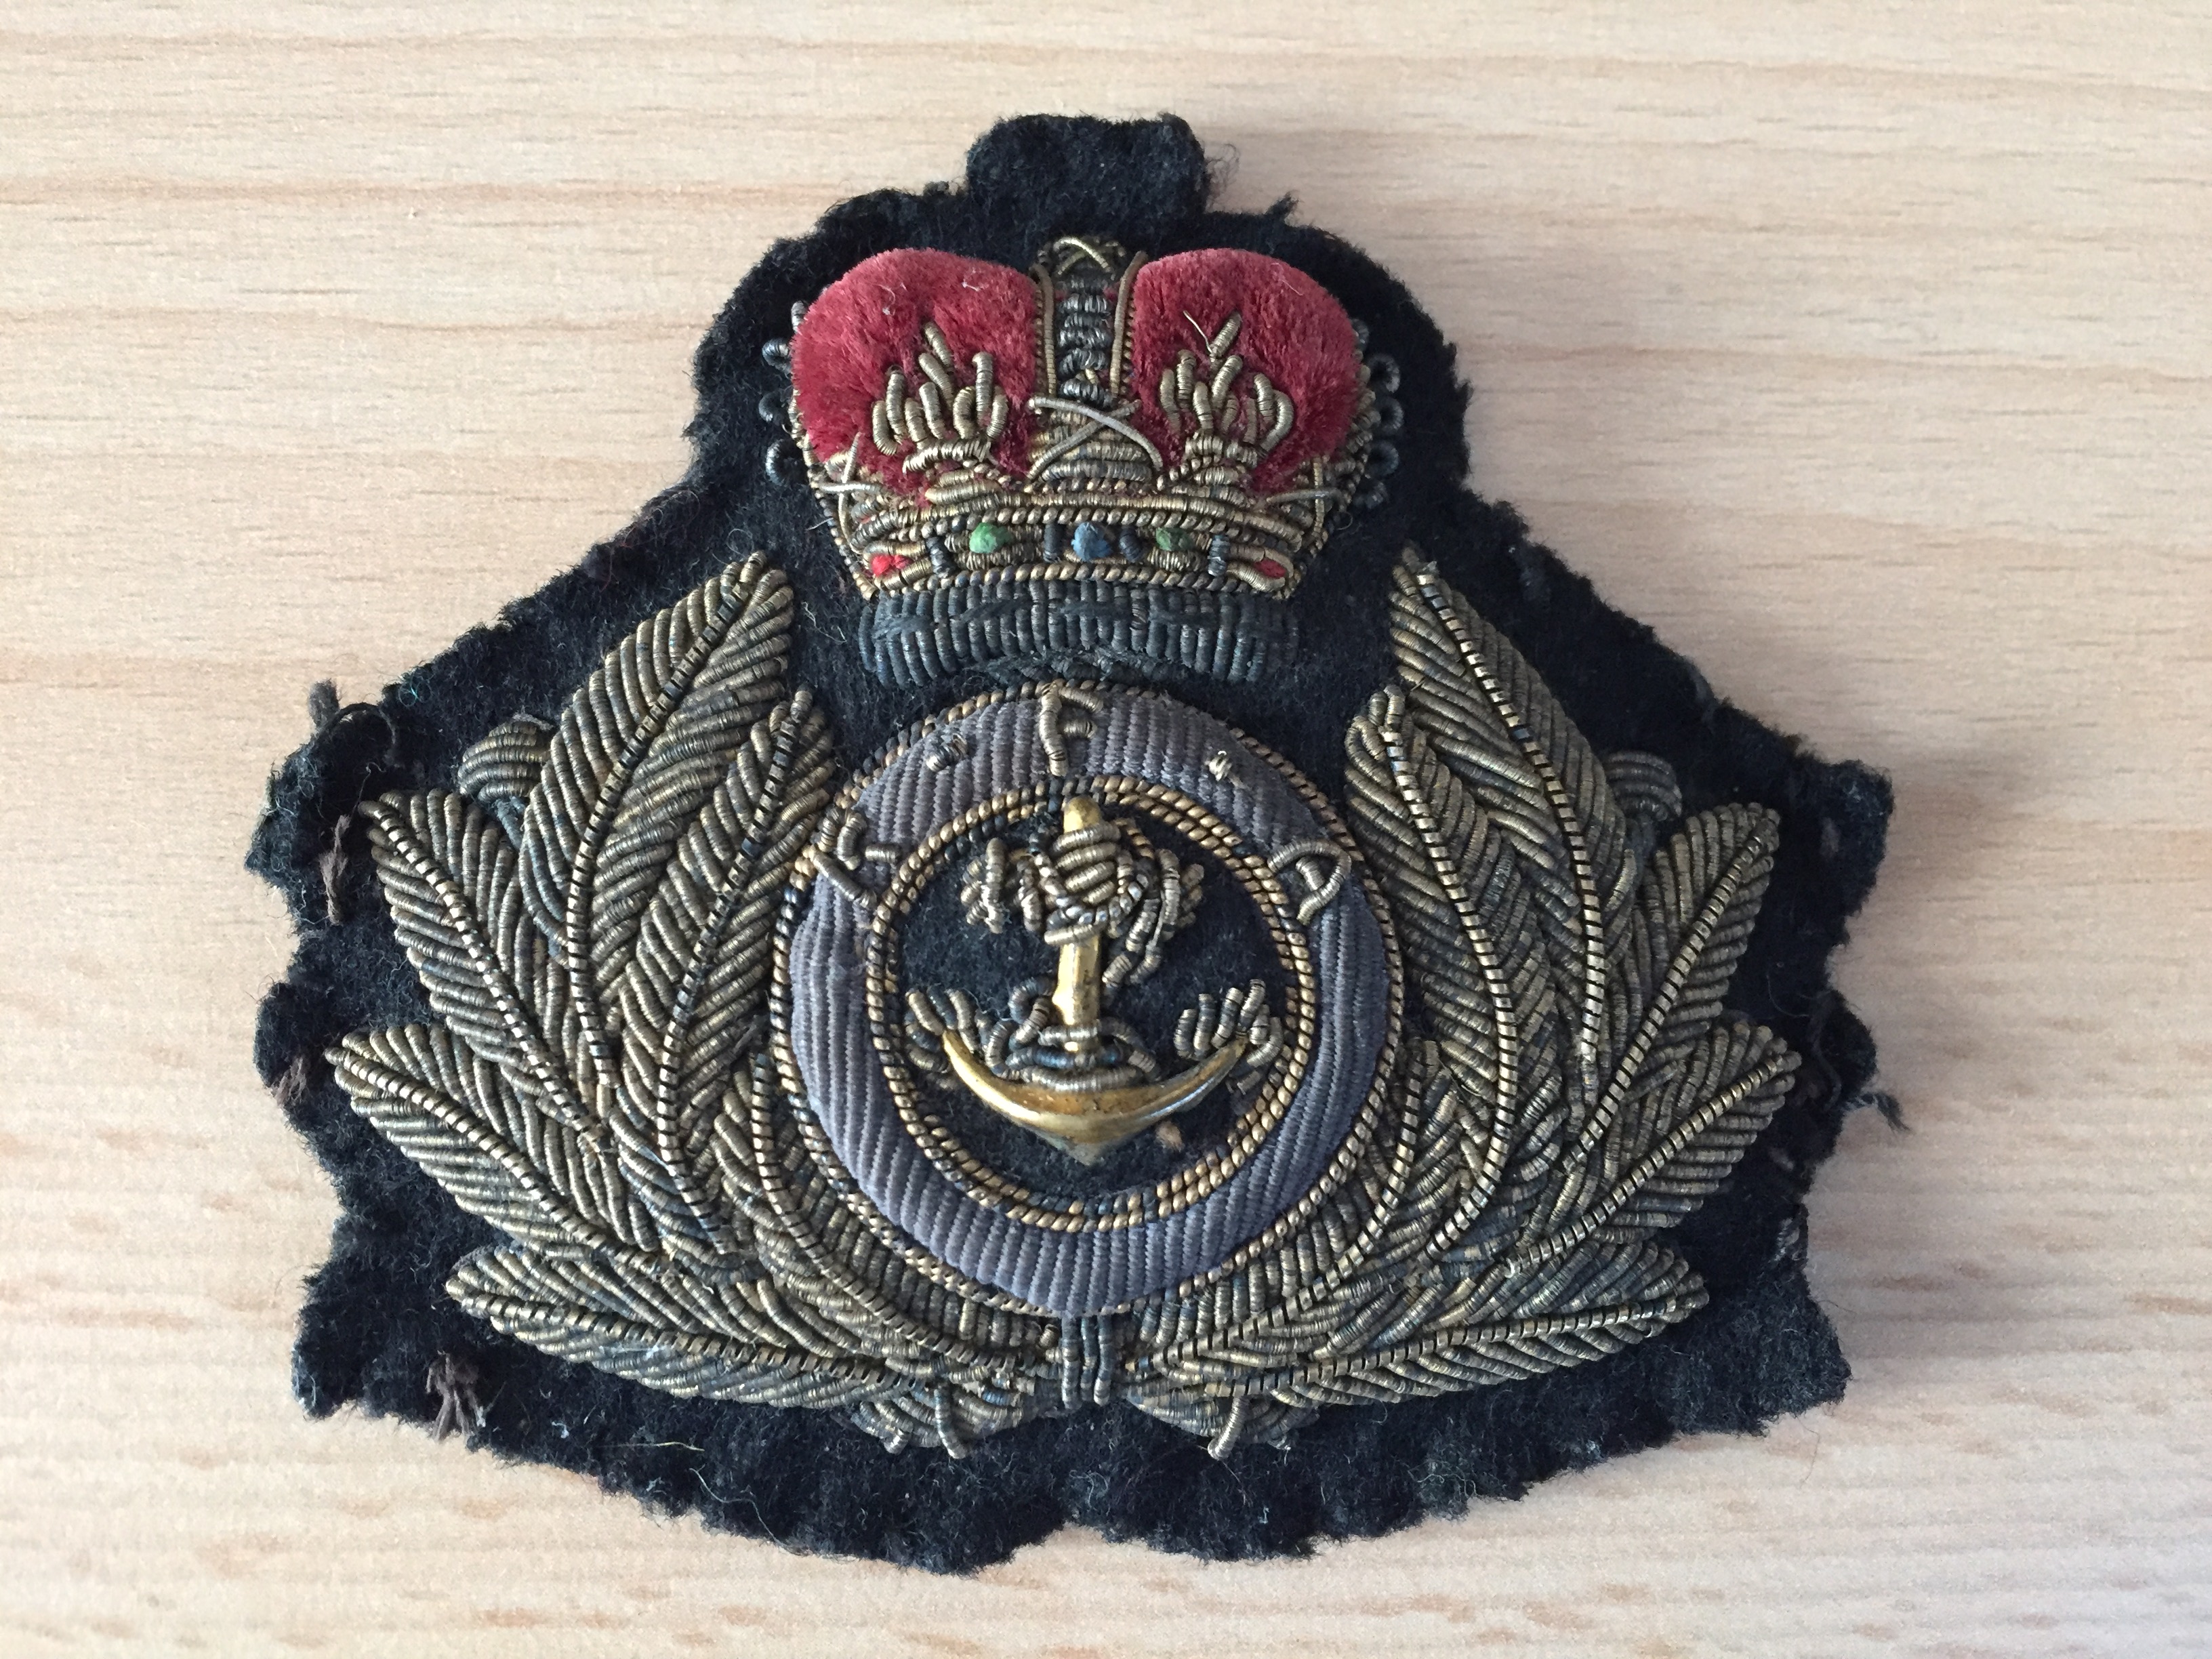 OFFICERS BADGE FROM THE ROYAL FLEET AUXILIARY UNIT CIRCA 1950's